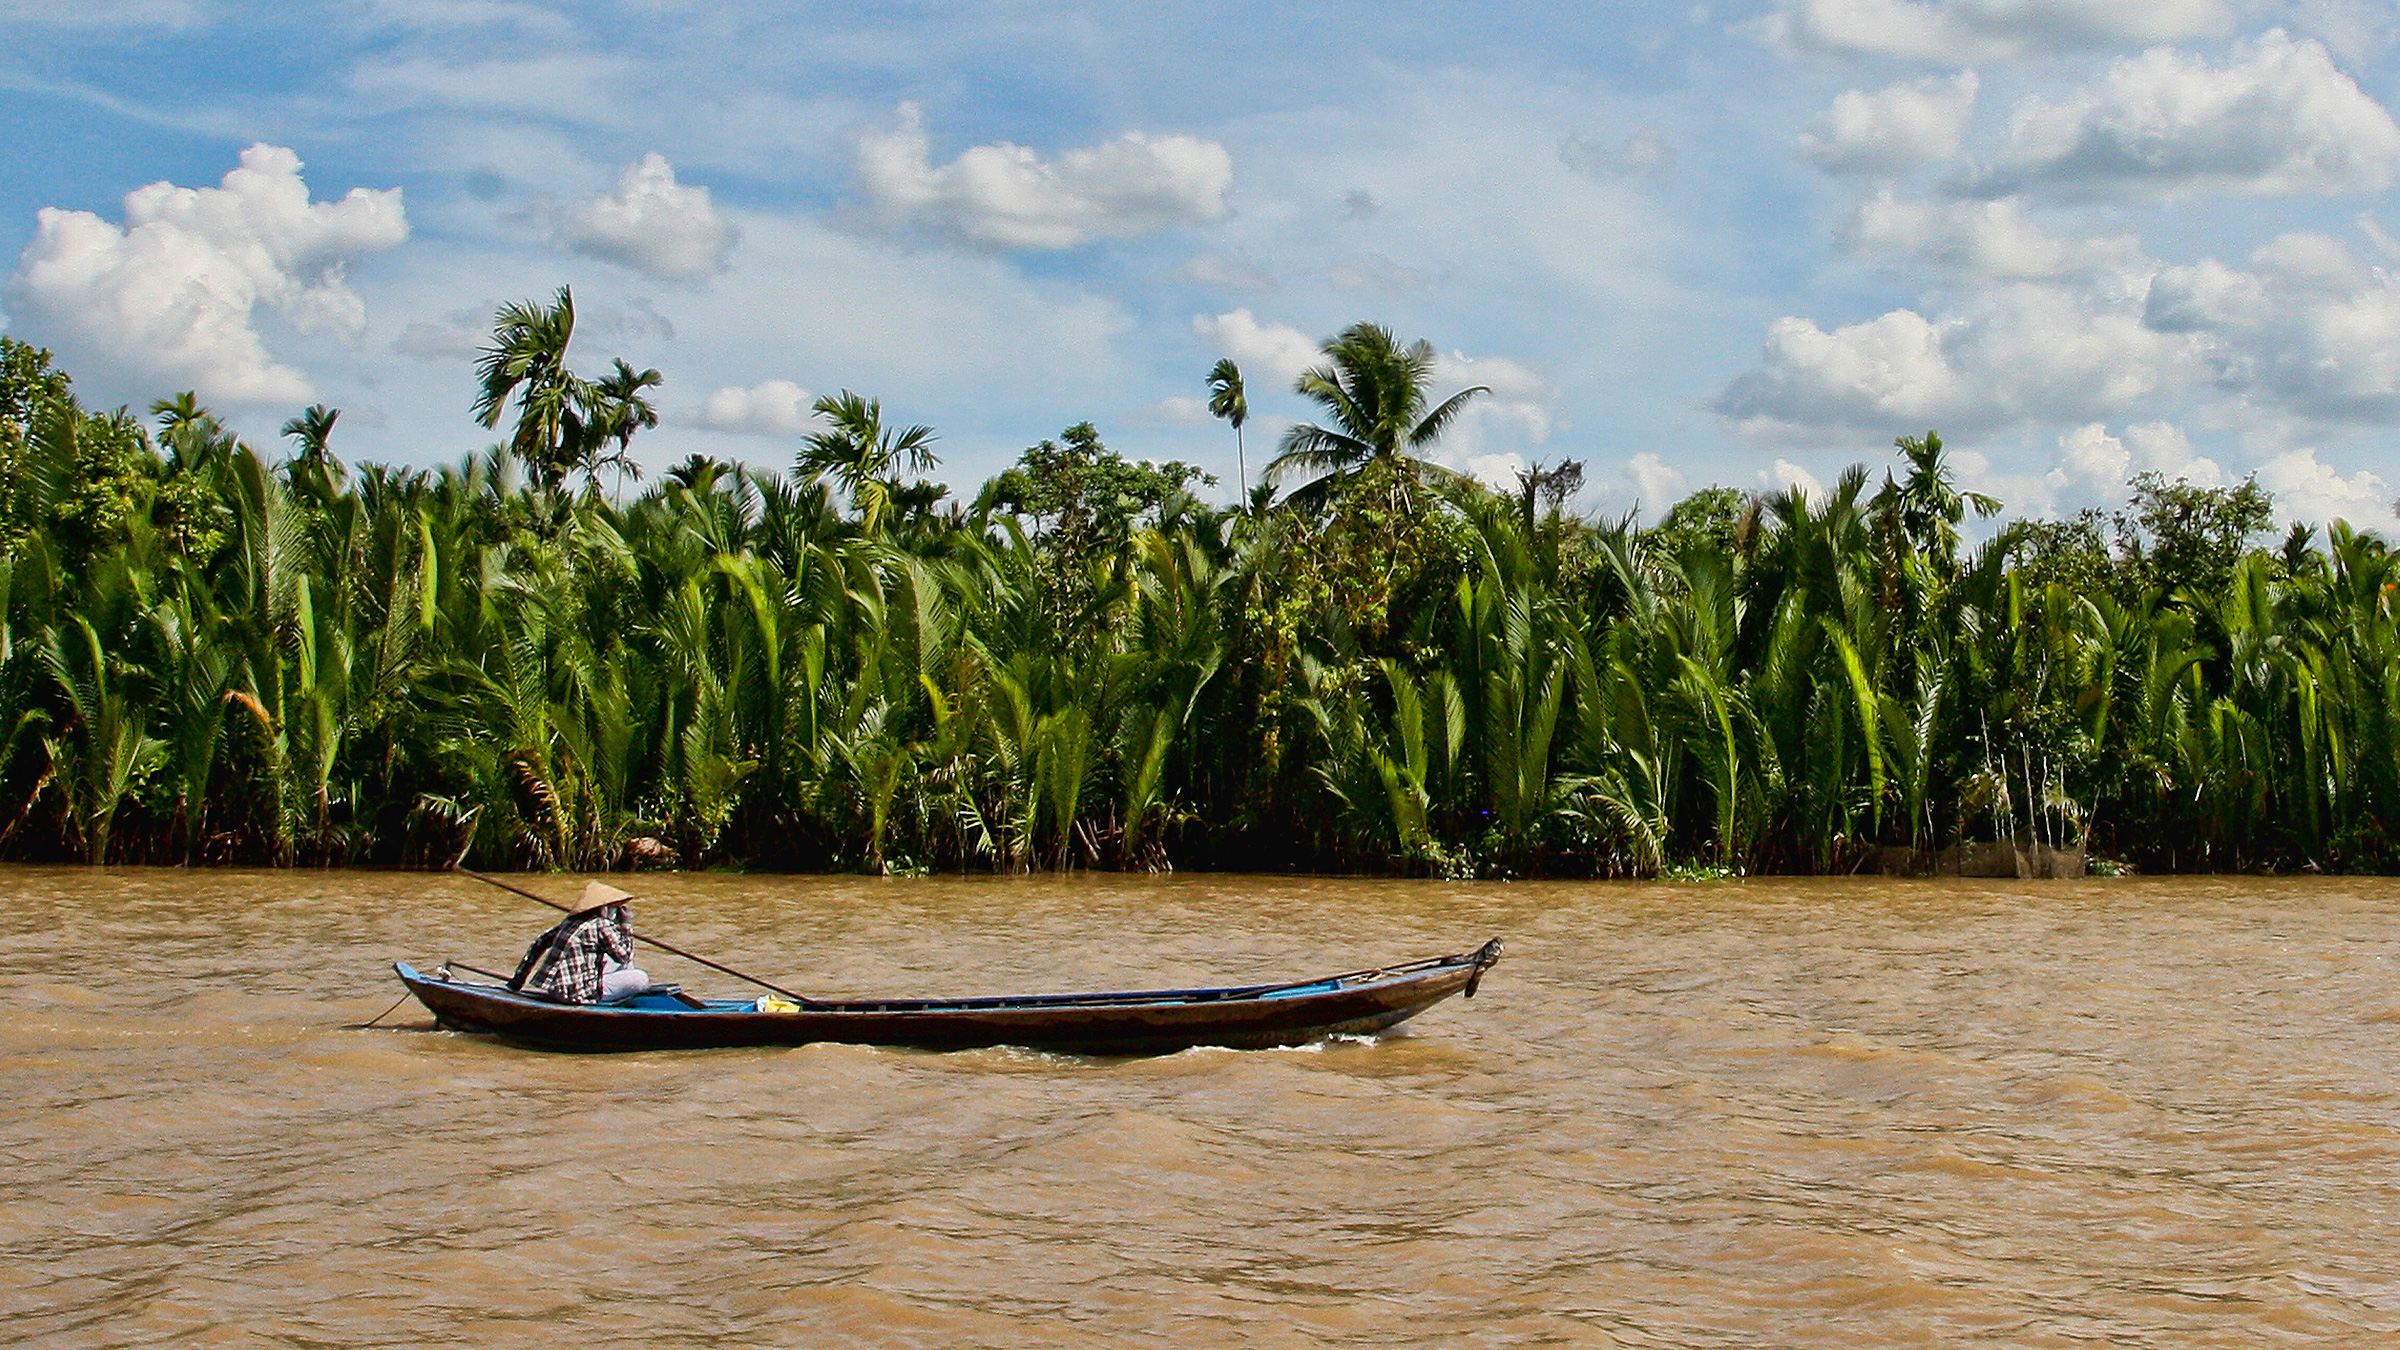 Introduction to the Mekong Delta Region